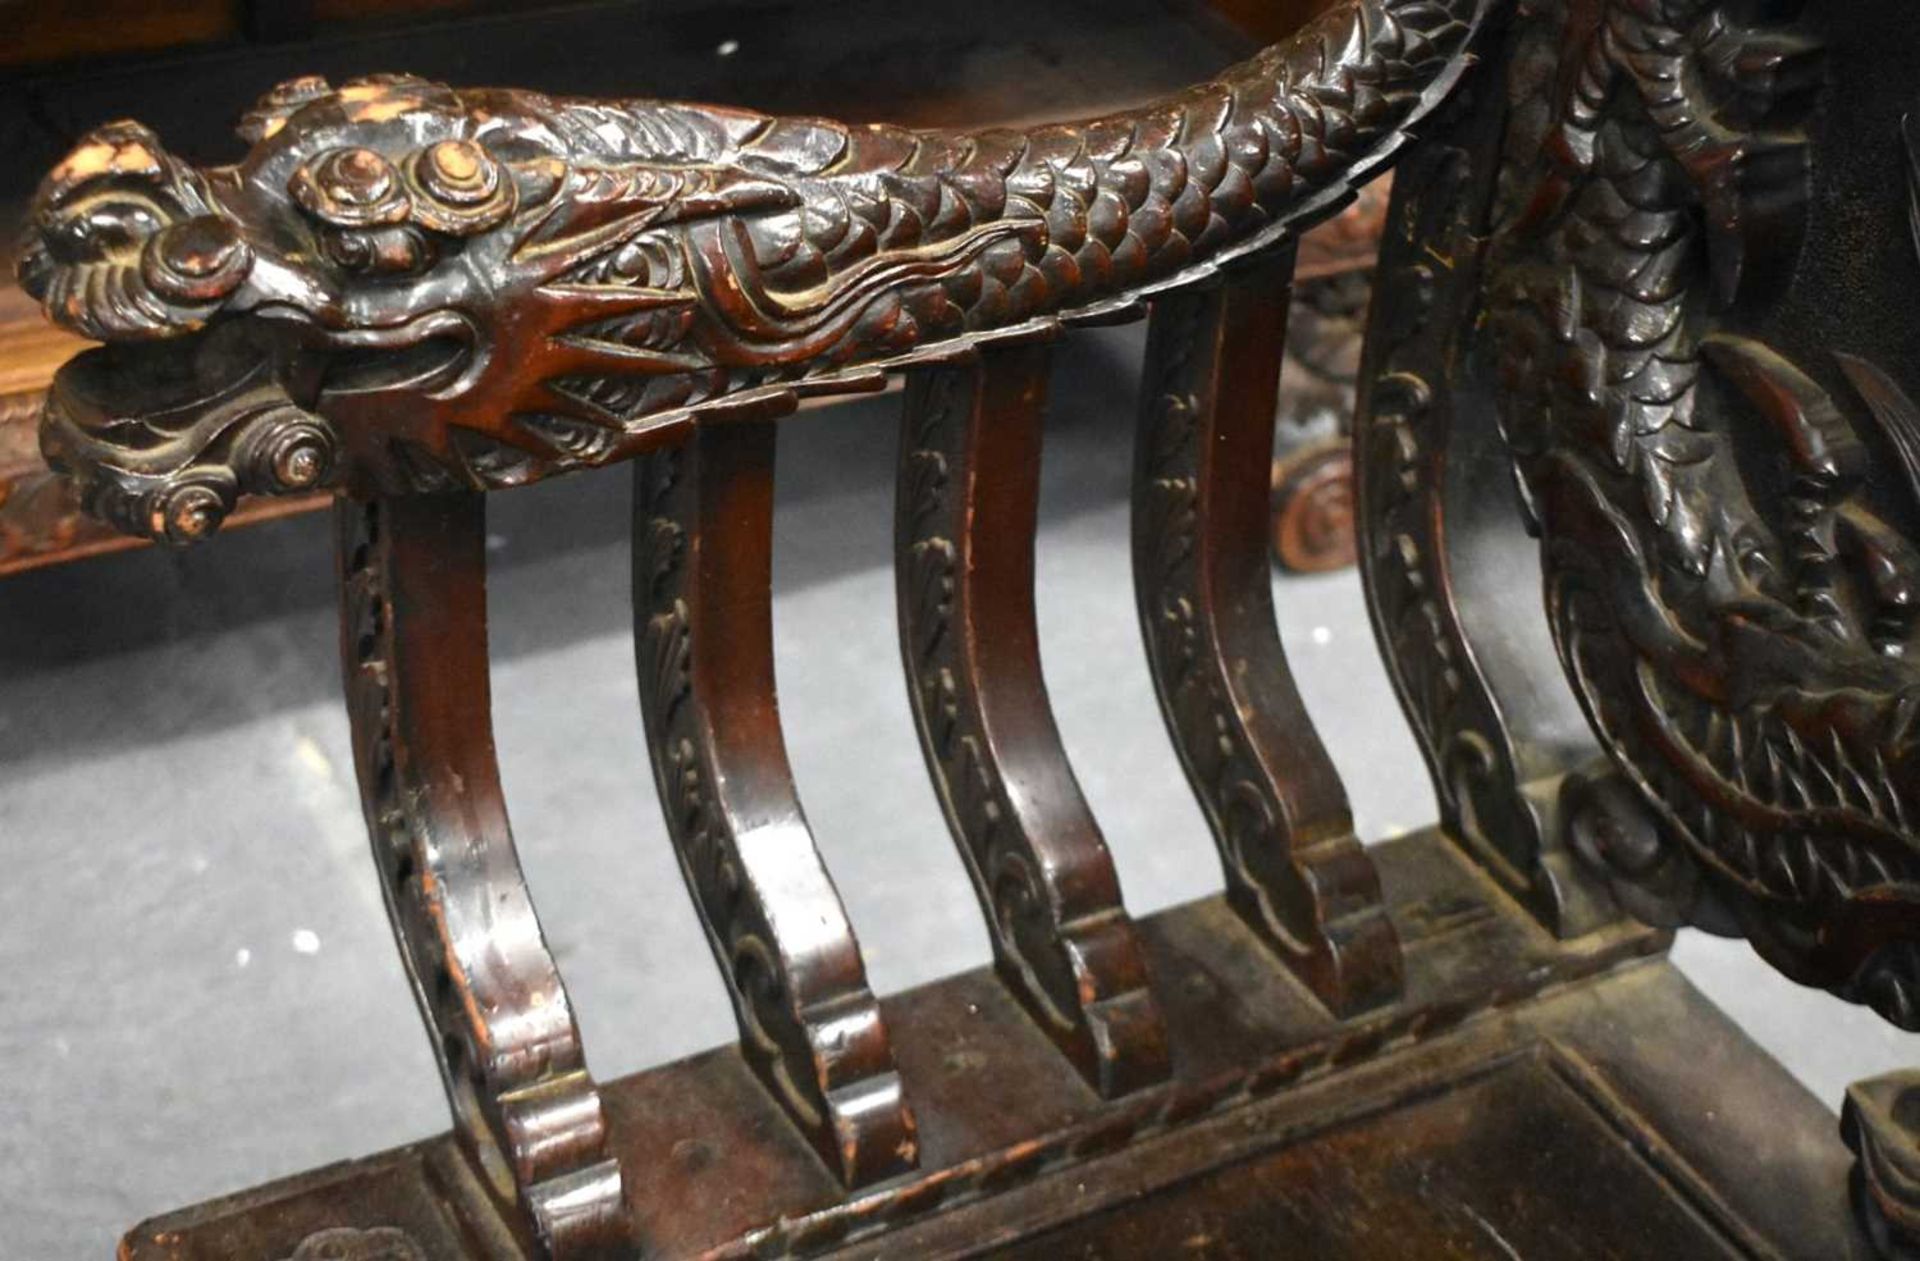 A LARGE 19TH CENTURY JAPANESE MEIJI PERIOD CARVED WOOD DRAGON BENCH. 125 cm x 125 cm. - Image 7 of 14